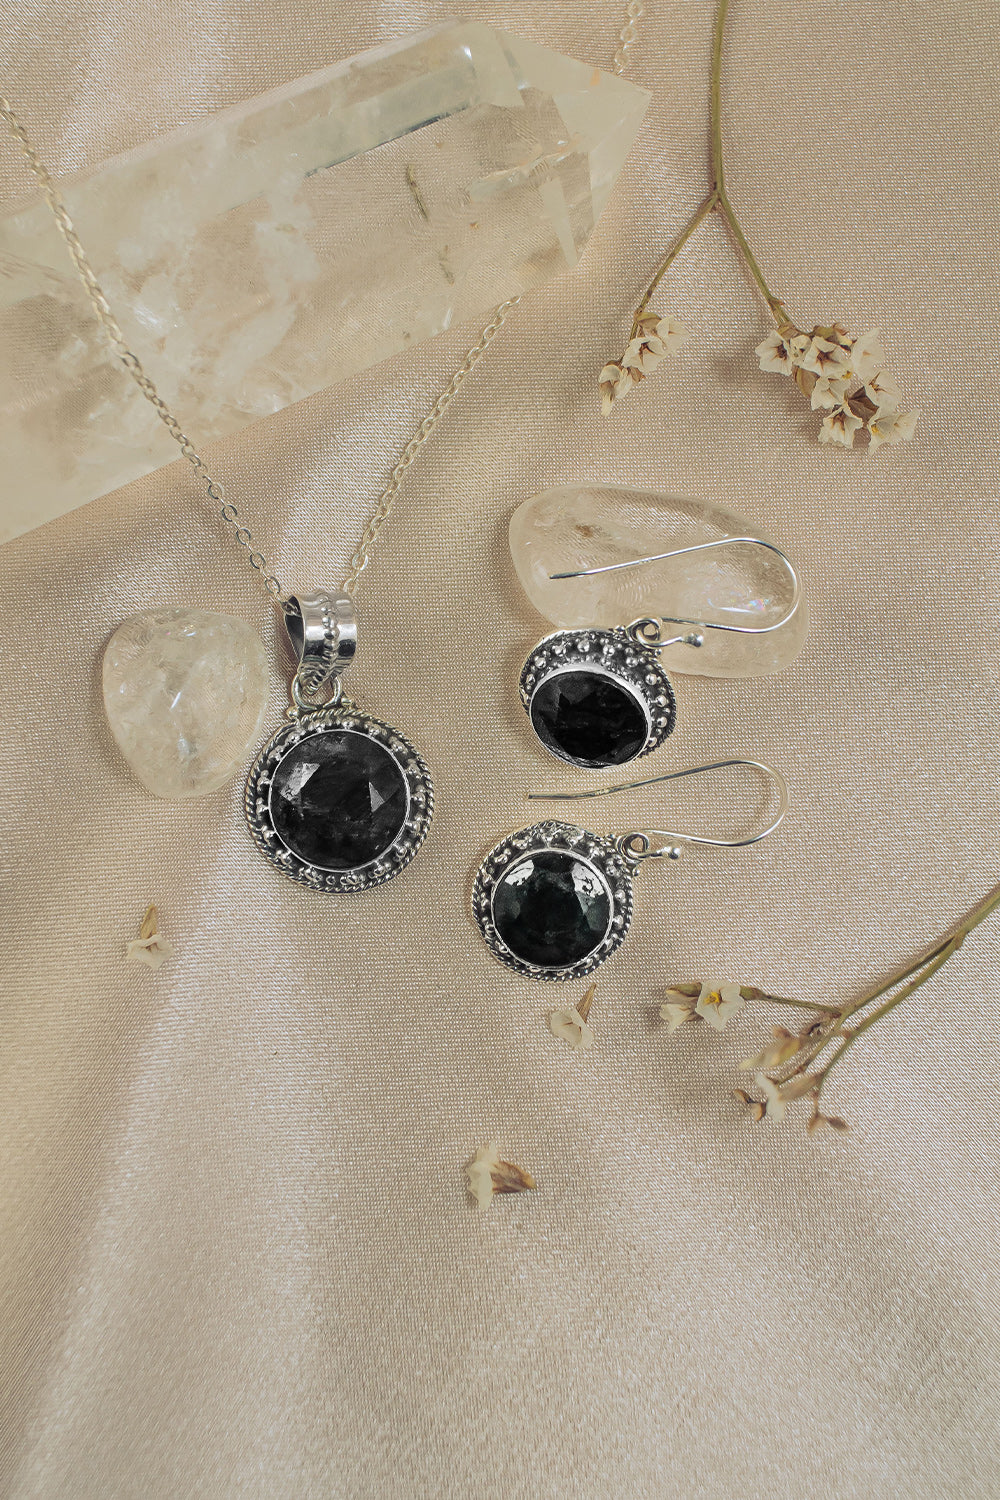 Sivalya Black Onyx Silver Necklace and Earrings Jewelry Set  - Aurora